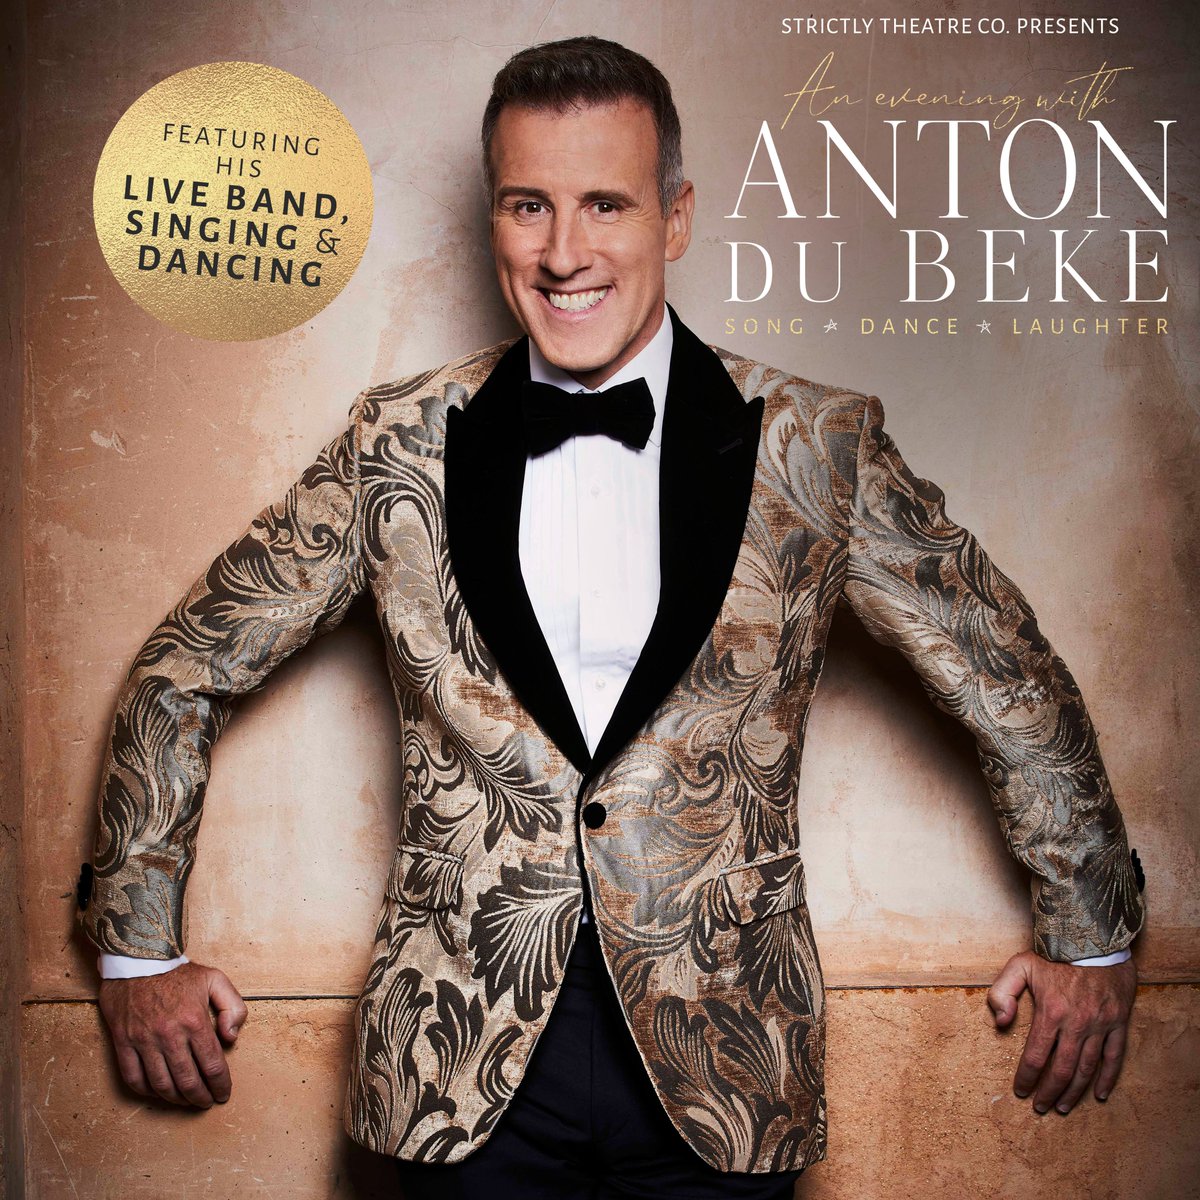 Tonight at the Victoria Theatre! An Evening with Anton Du Beke and Friends Show starts 7:30pm Doors open 6:30pm Tickets are still available - Book now at victoriatheatre.co.uk